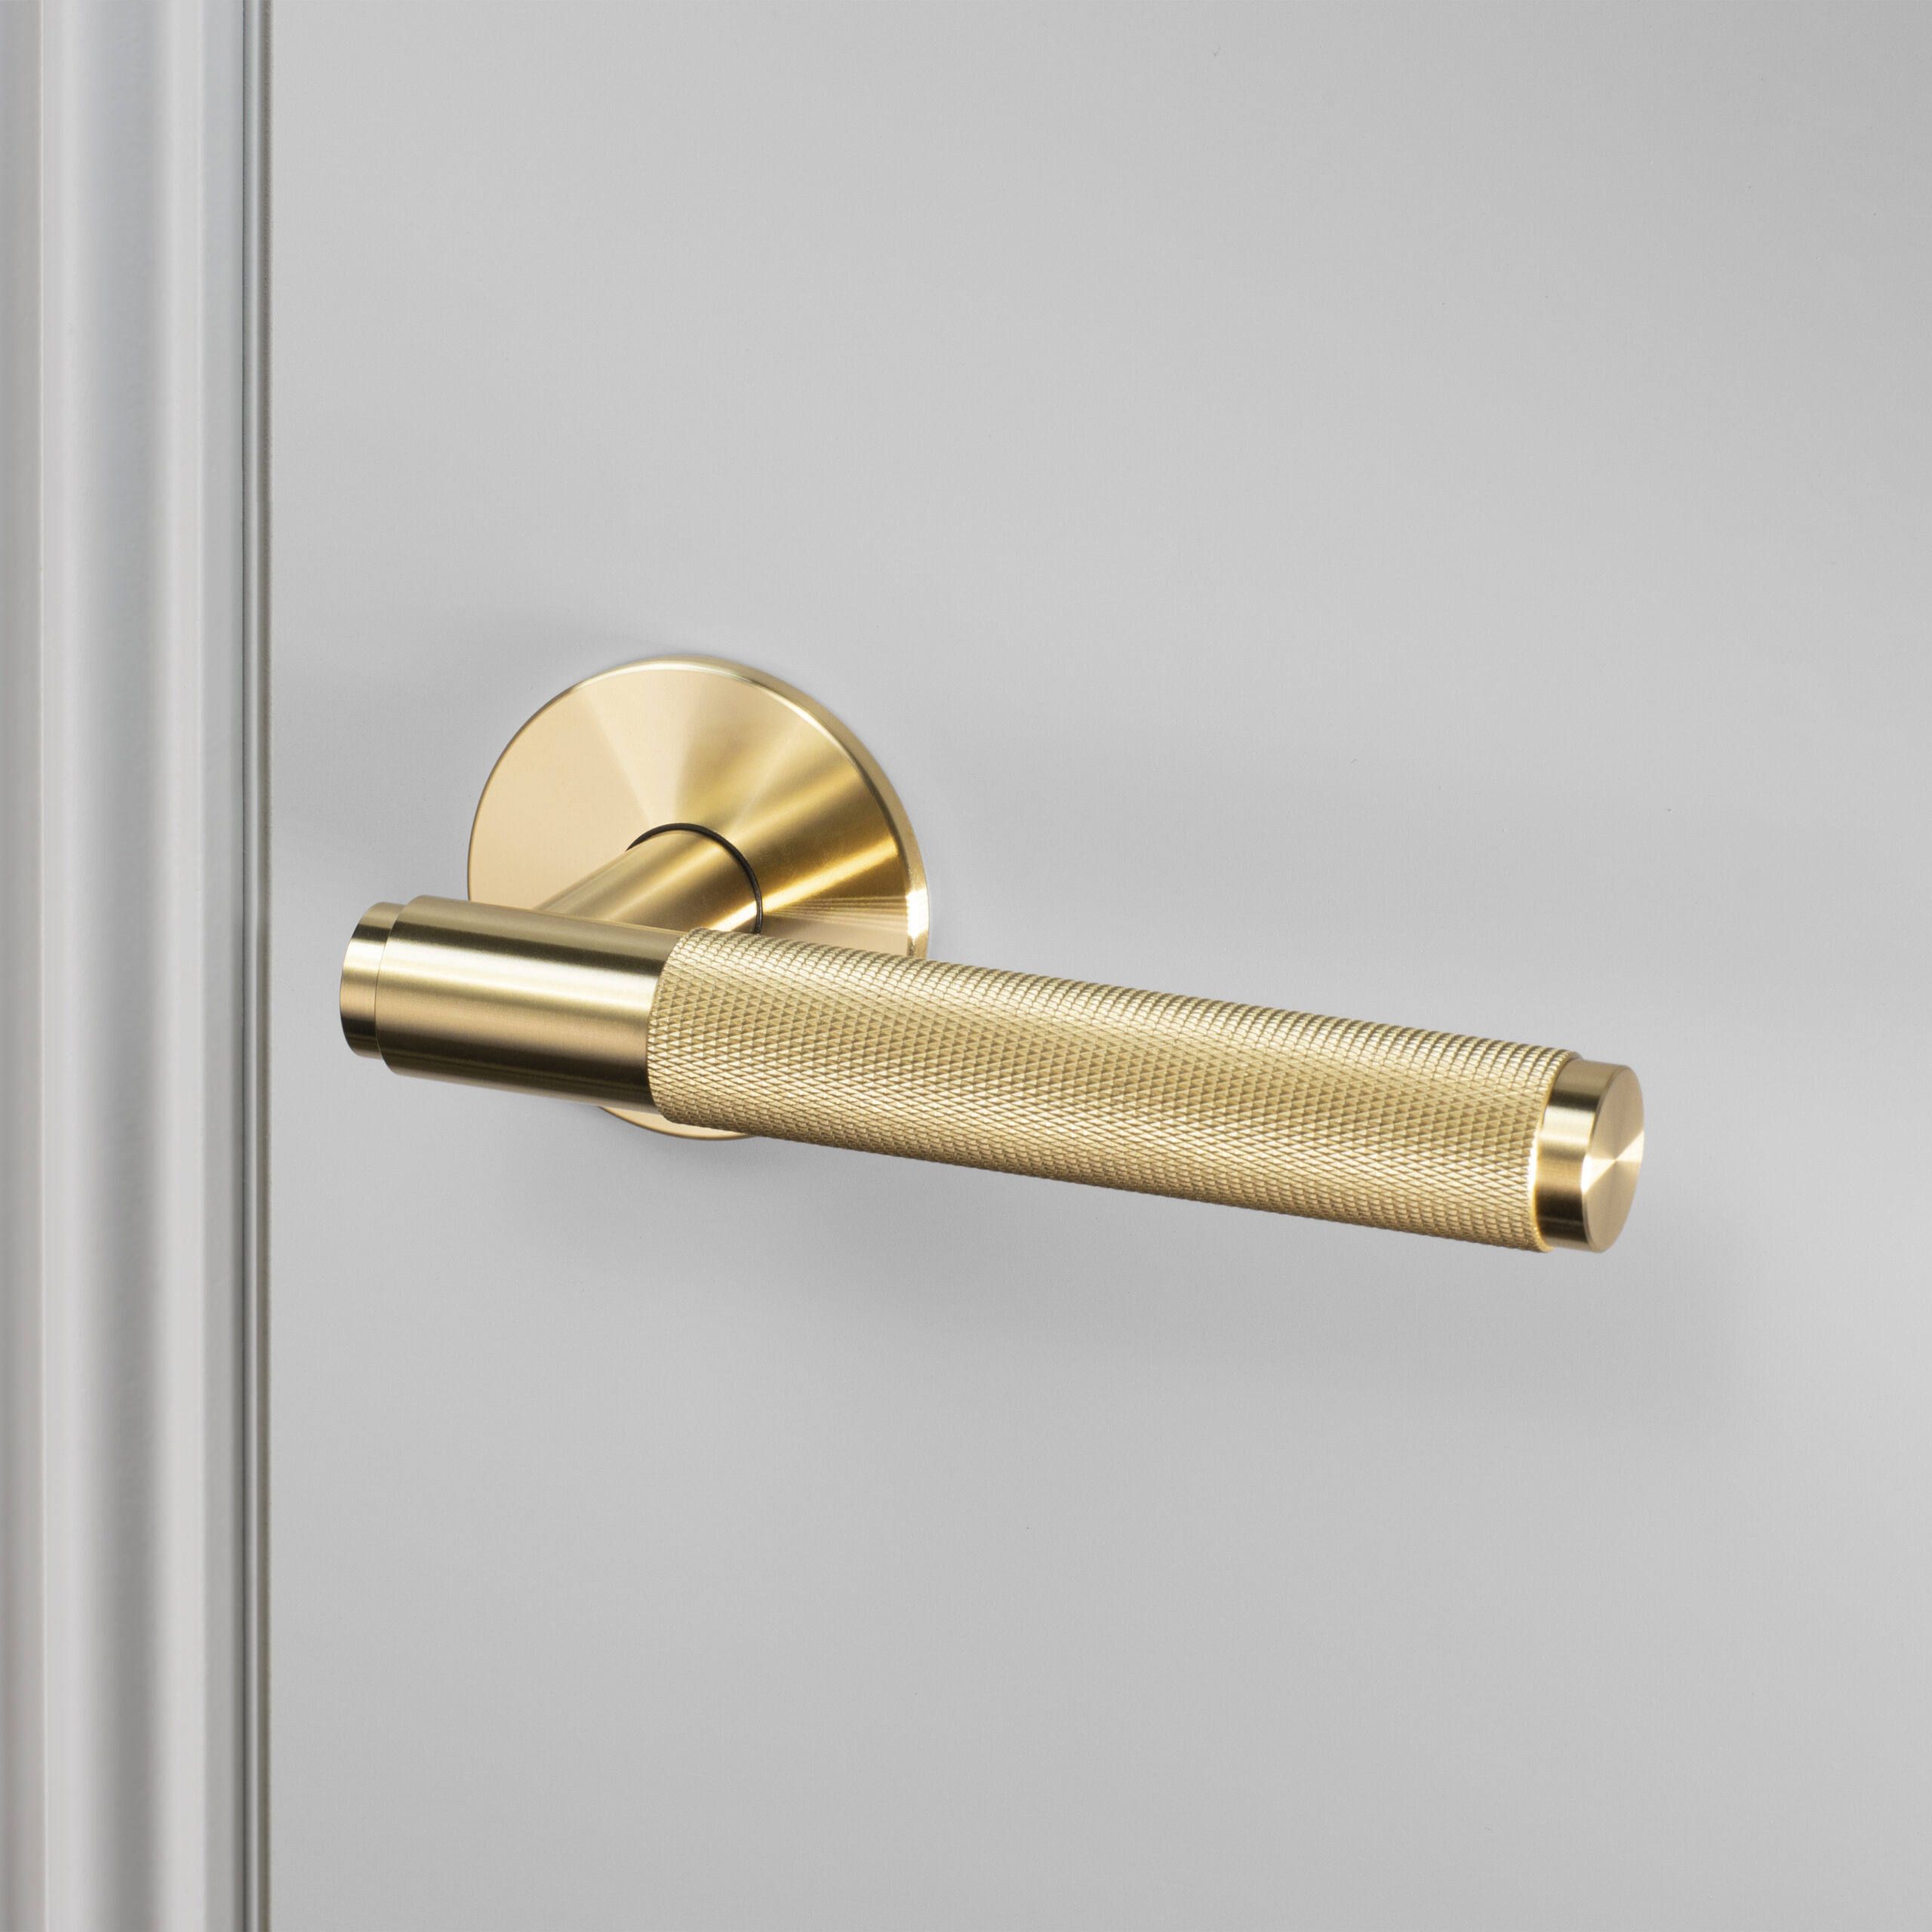 FIXED DOOR HANDLE / SINGLE-SIDED / CROSS / BRASS - Buster + Punch